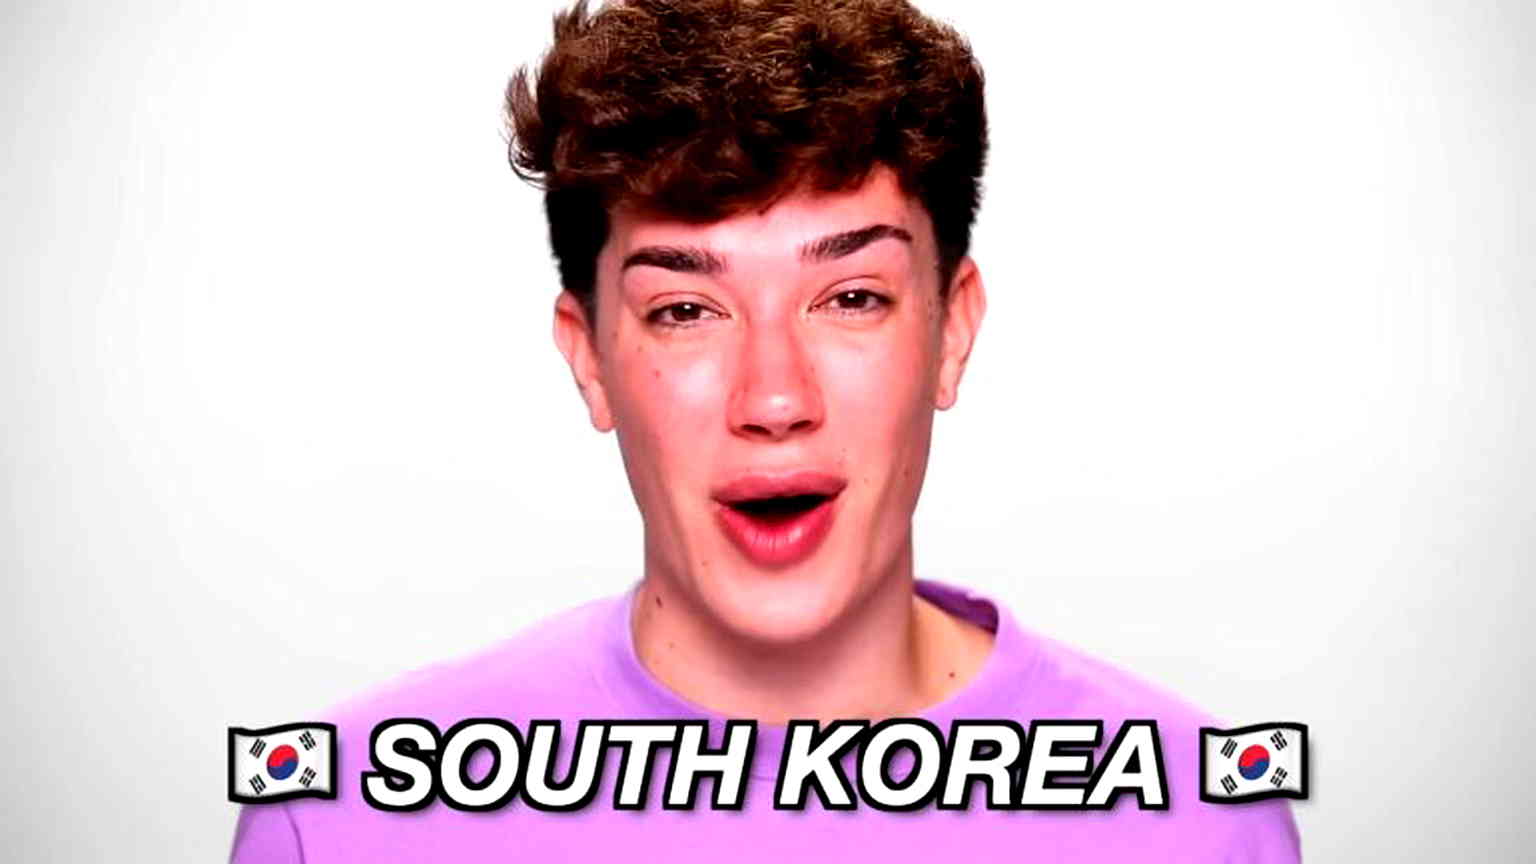 James Charles sparks mixed reaction for ‘Korean makeup’ video featuring Chinese, Japanese influencers